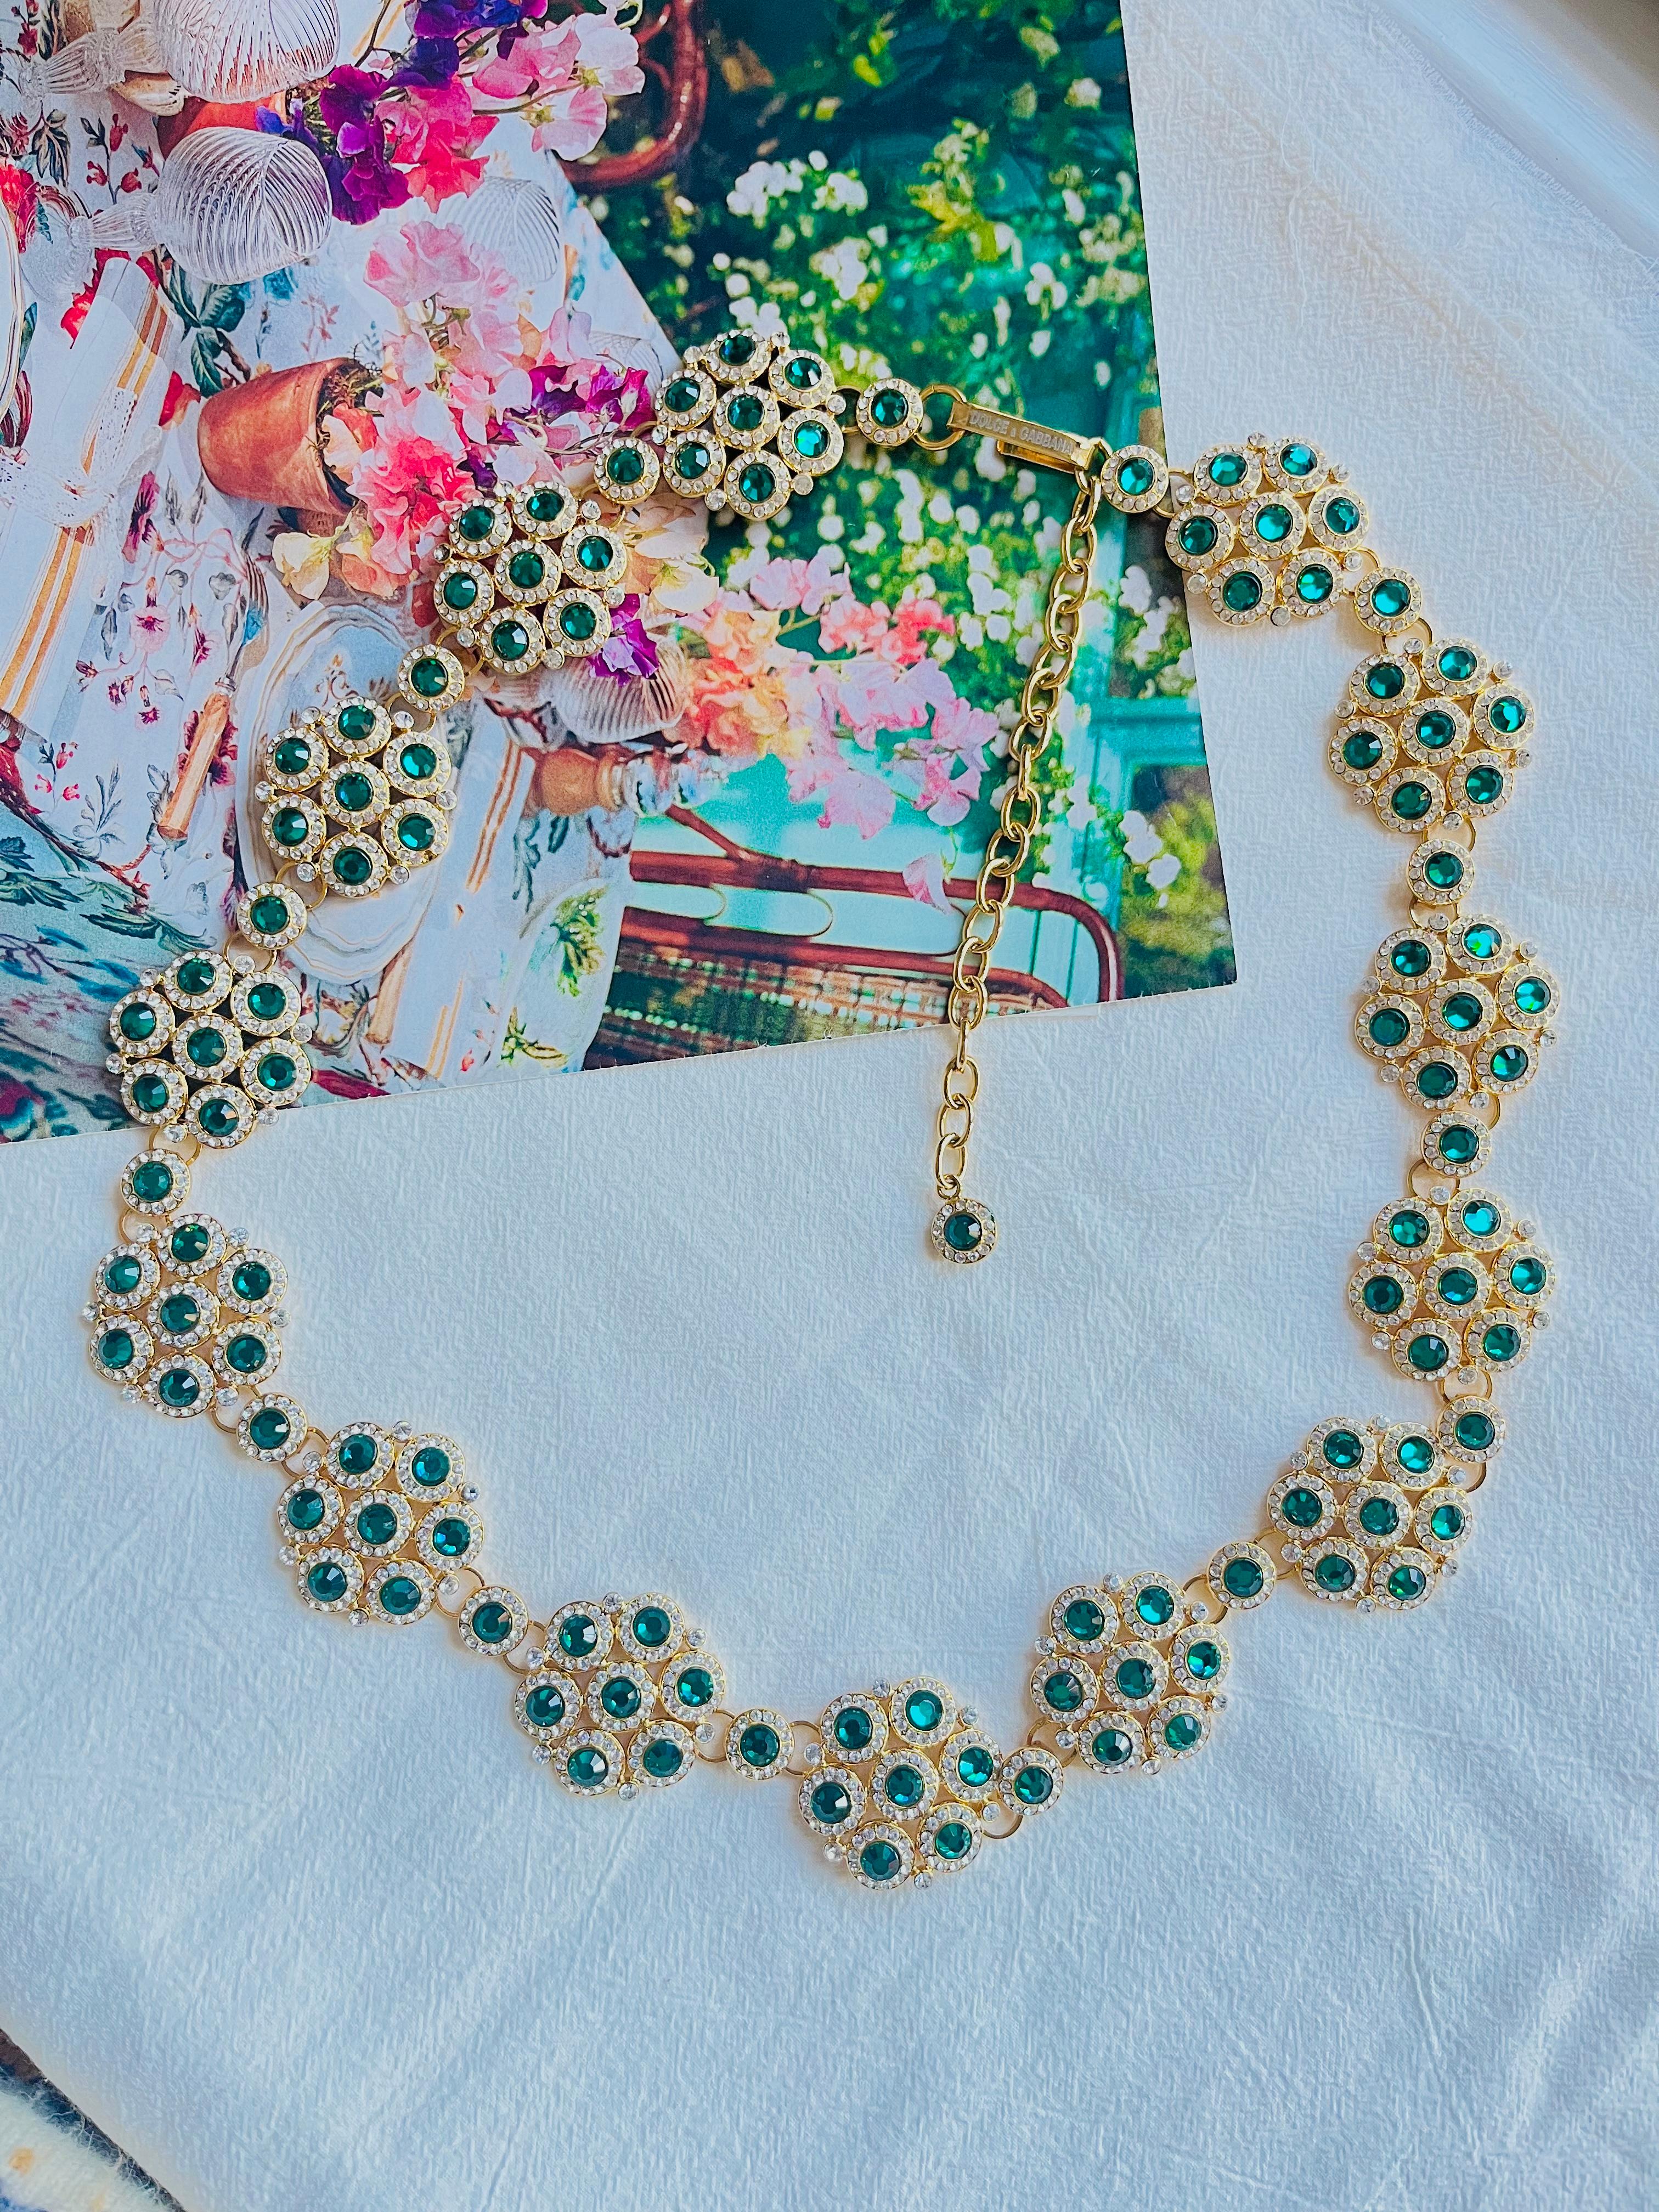 DOLCE & GABBANA Vintage Emerald Green Crystals Floral Interlock Belt Necklace, Gold Plated

Very excellent condition. 100% Genuine.  Can be used as a long necklace.

A very beautiful belt by DOLCE & GABBANA. Rare to find. Come with original